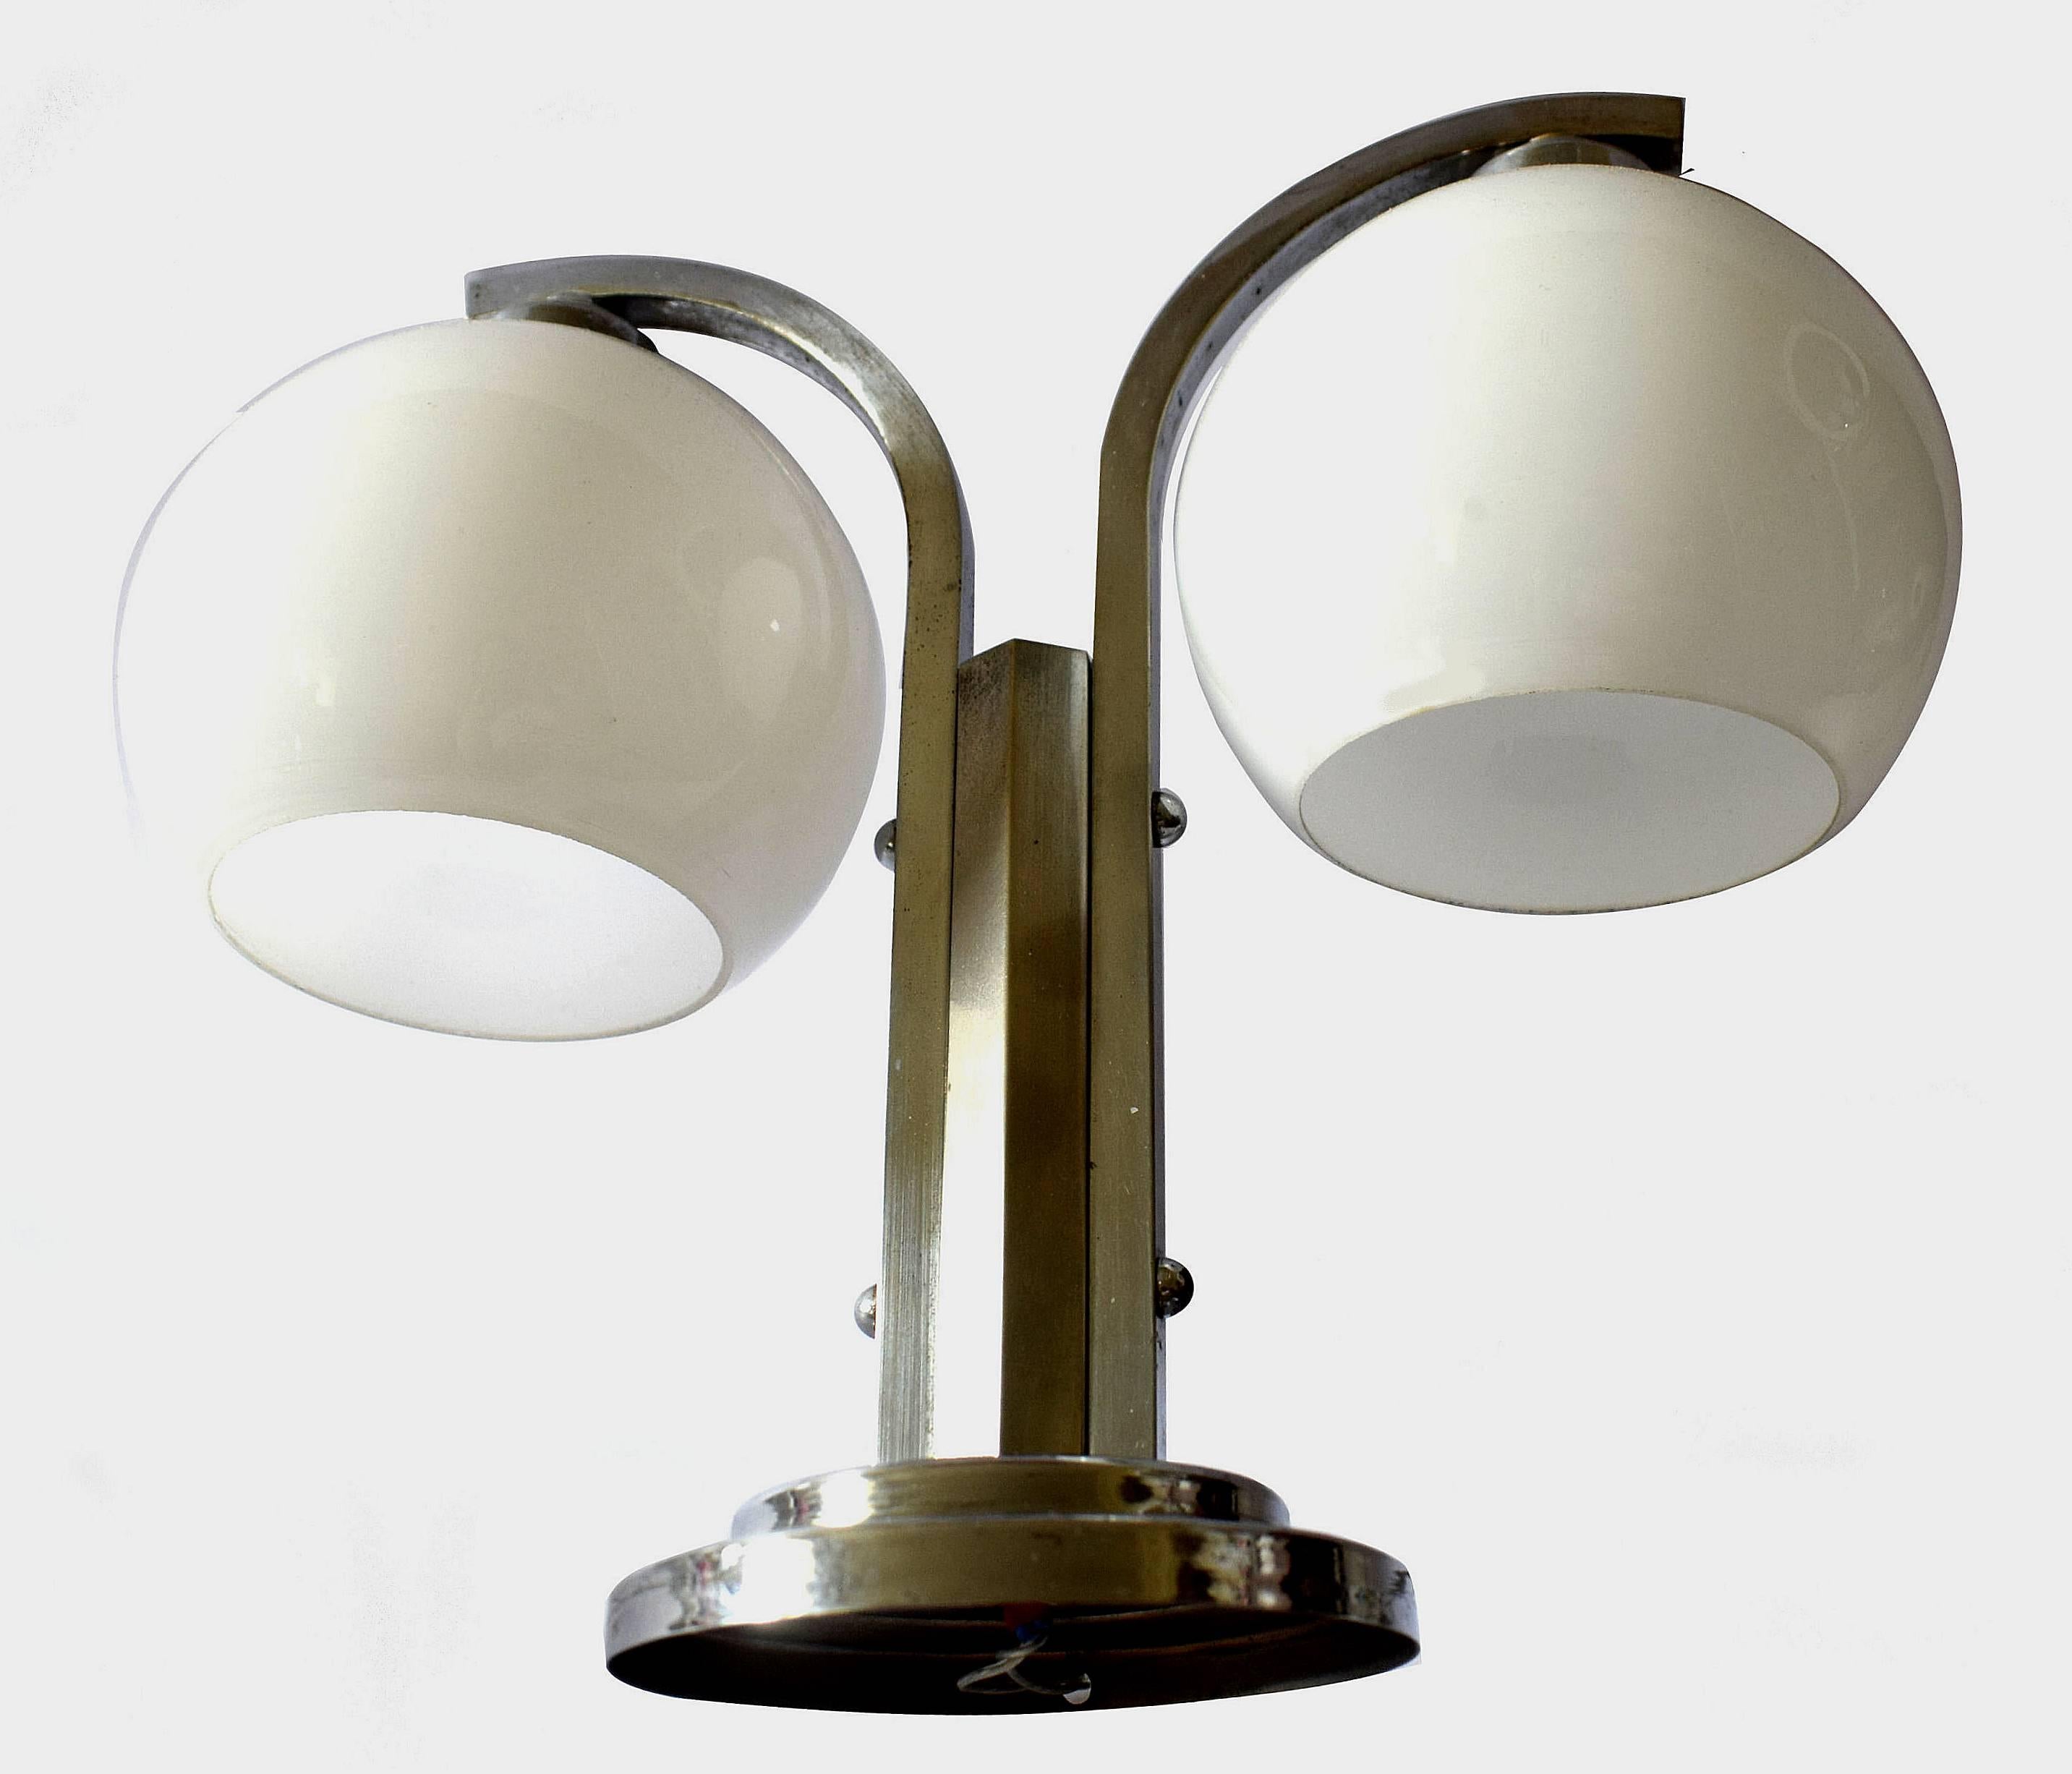 French Art Deco Modernist Double Shade Table Lamp For Sale